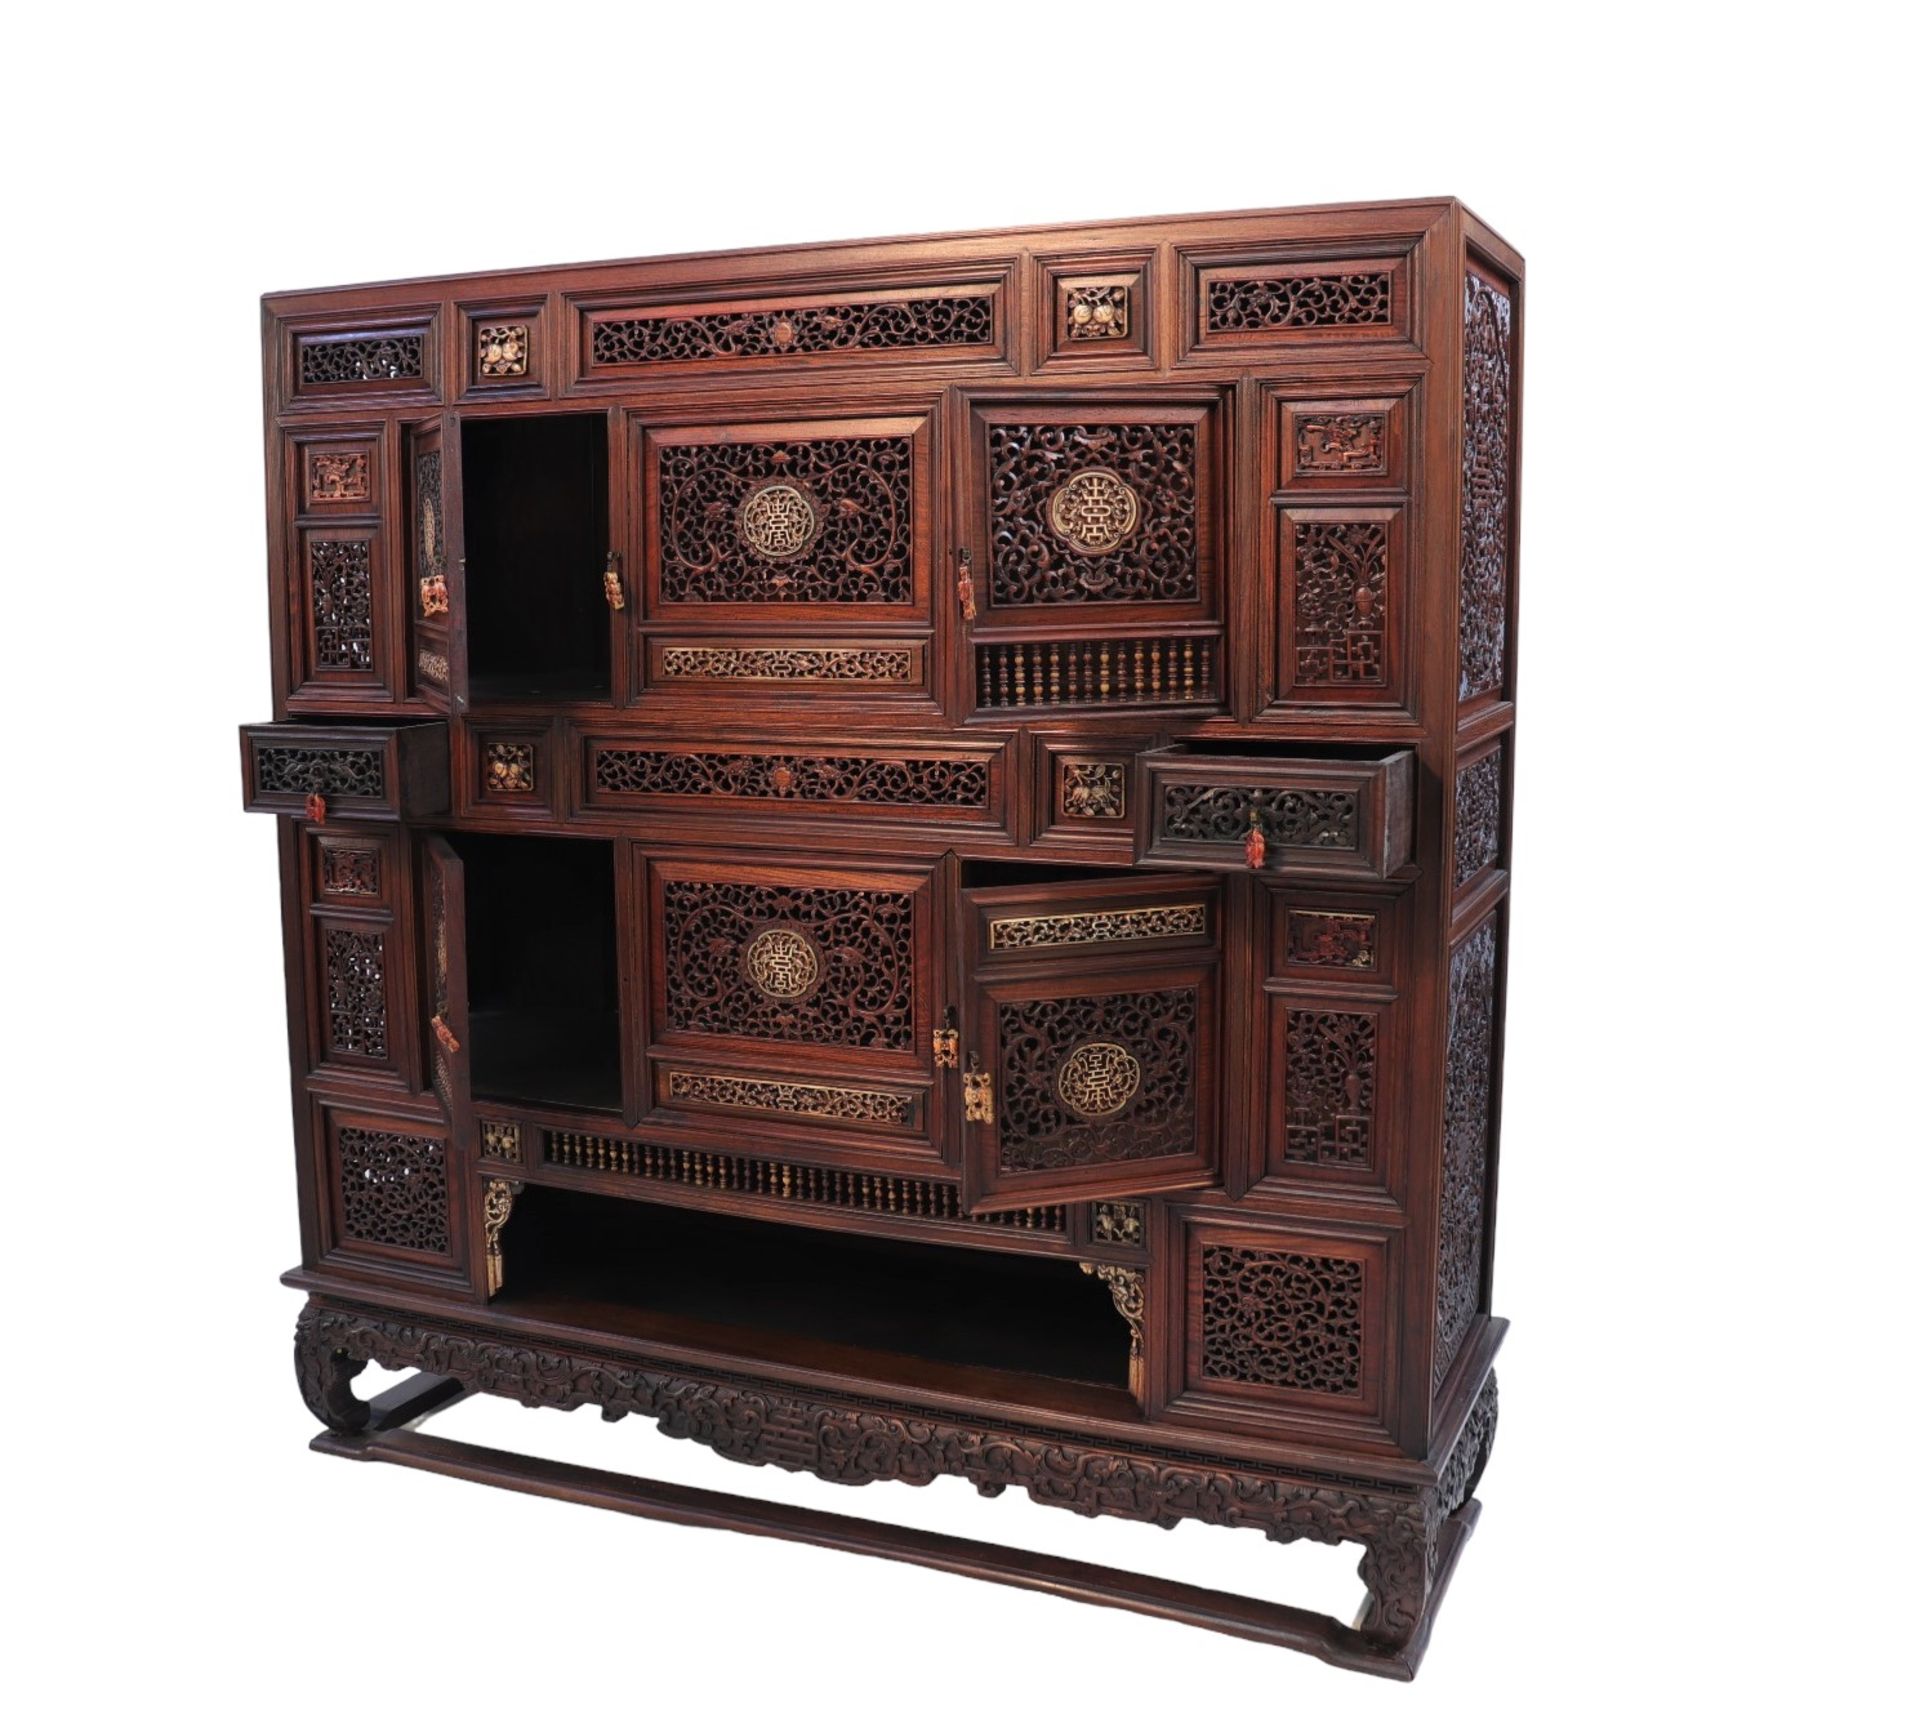 An exceptional piece of Chinese furniture decorated with dragons and bone inlays from the Qing perio